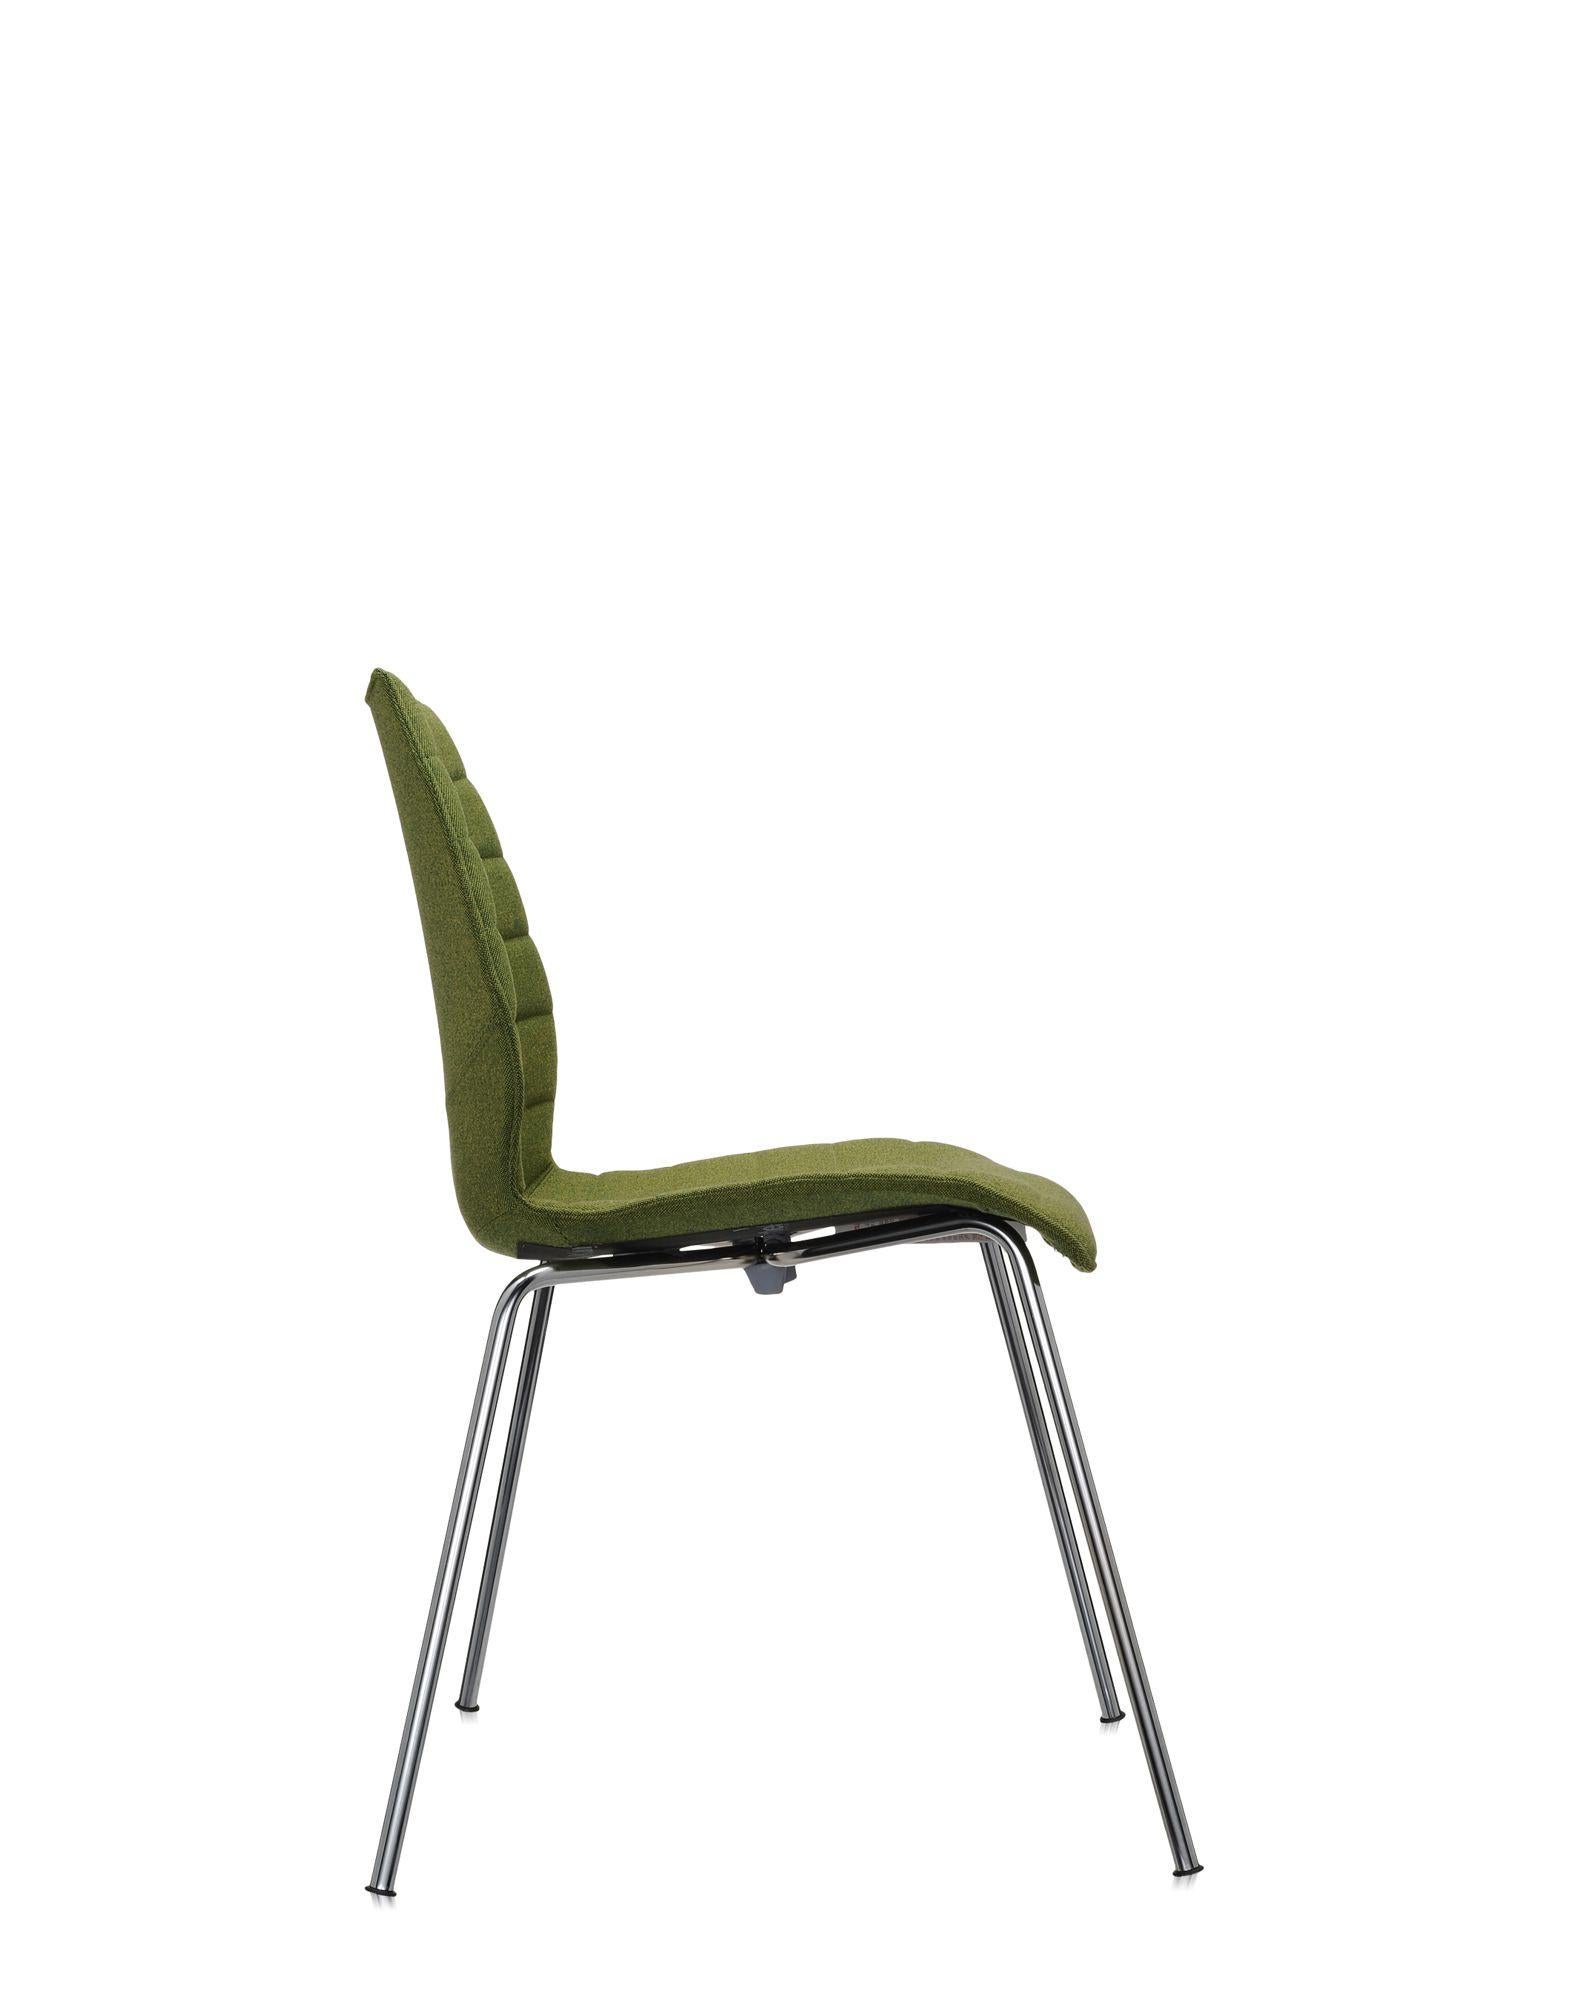 Modern Set of 2 Kartell Maui Soft Trevira Chair in Acid Green by Vico Magistretti